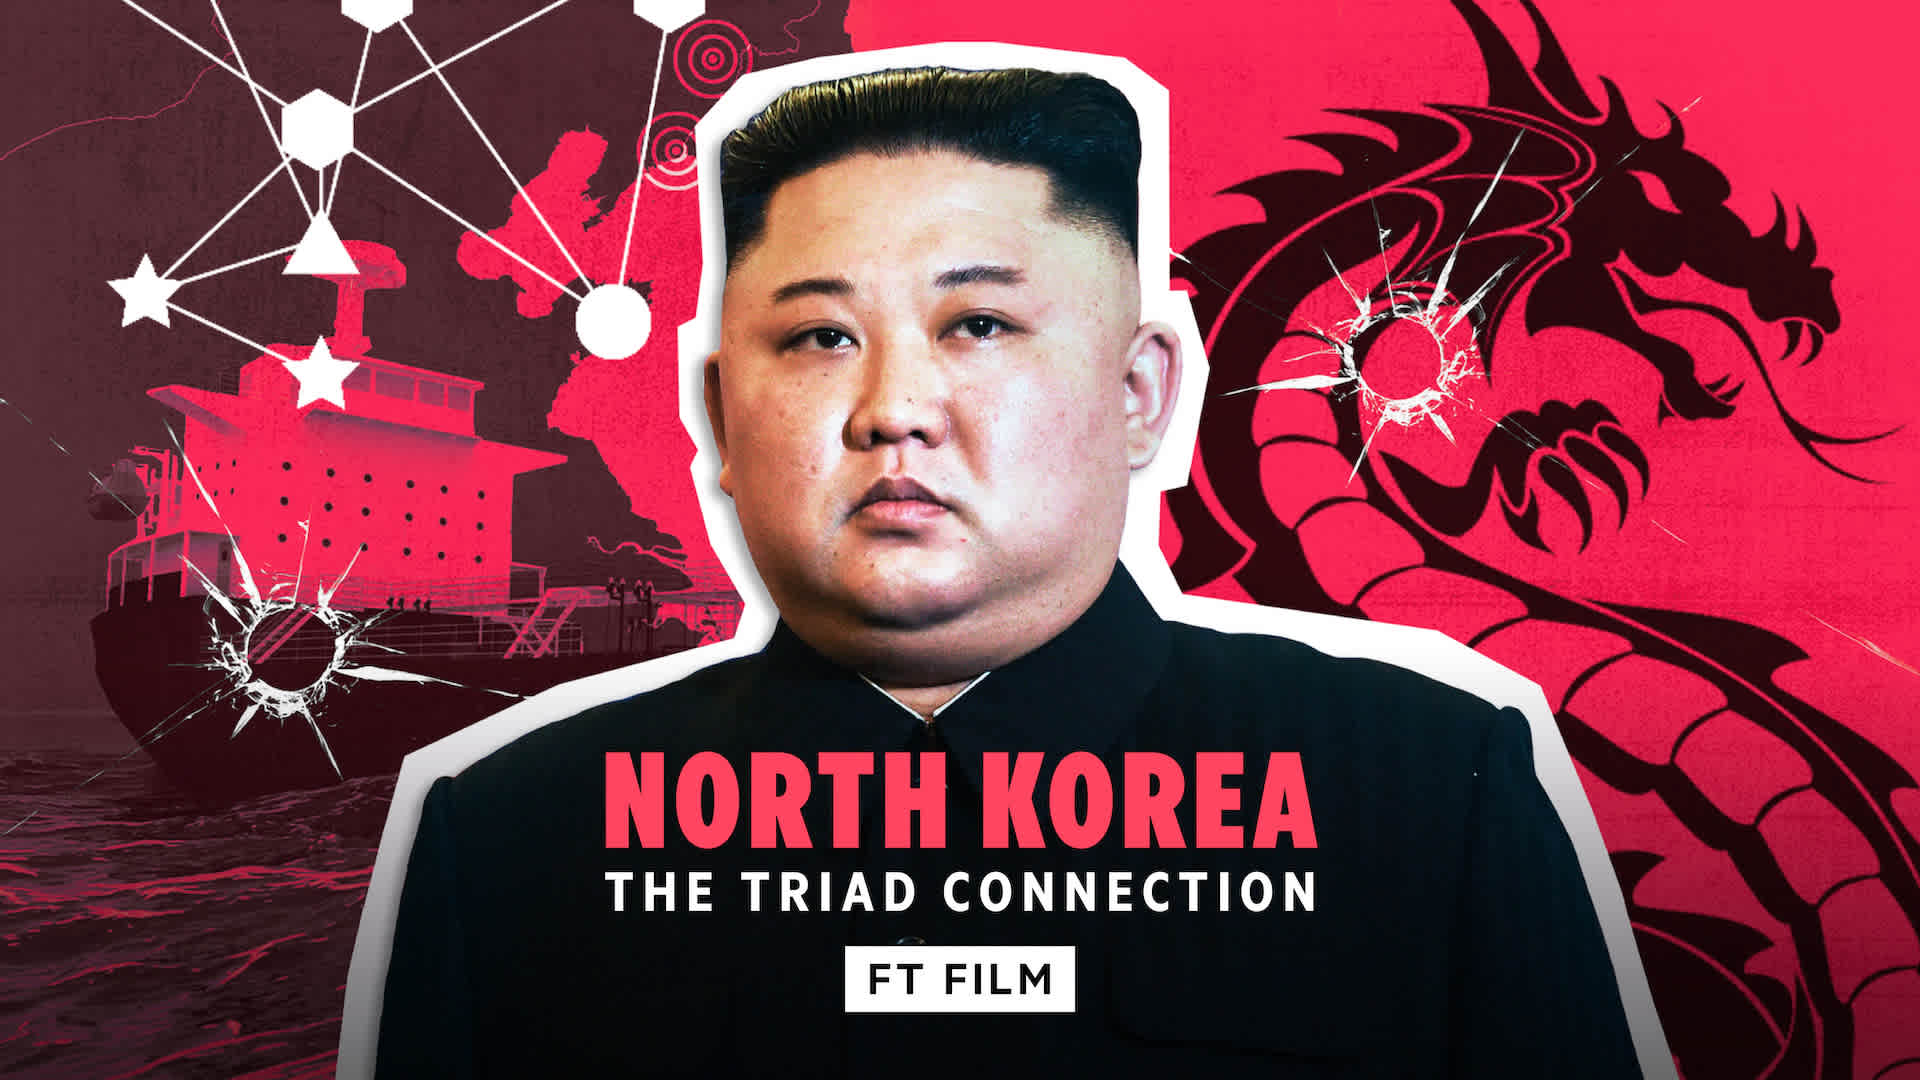 North Korea - The Triad Connection - FT Film